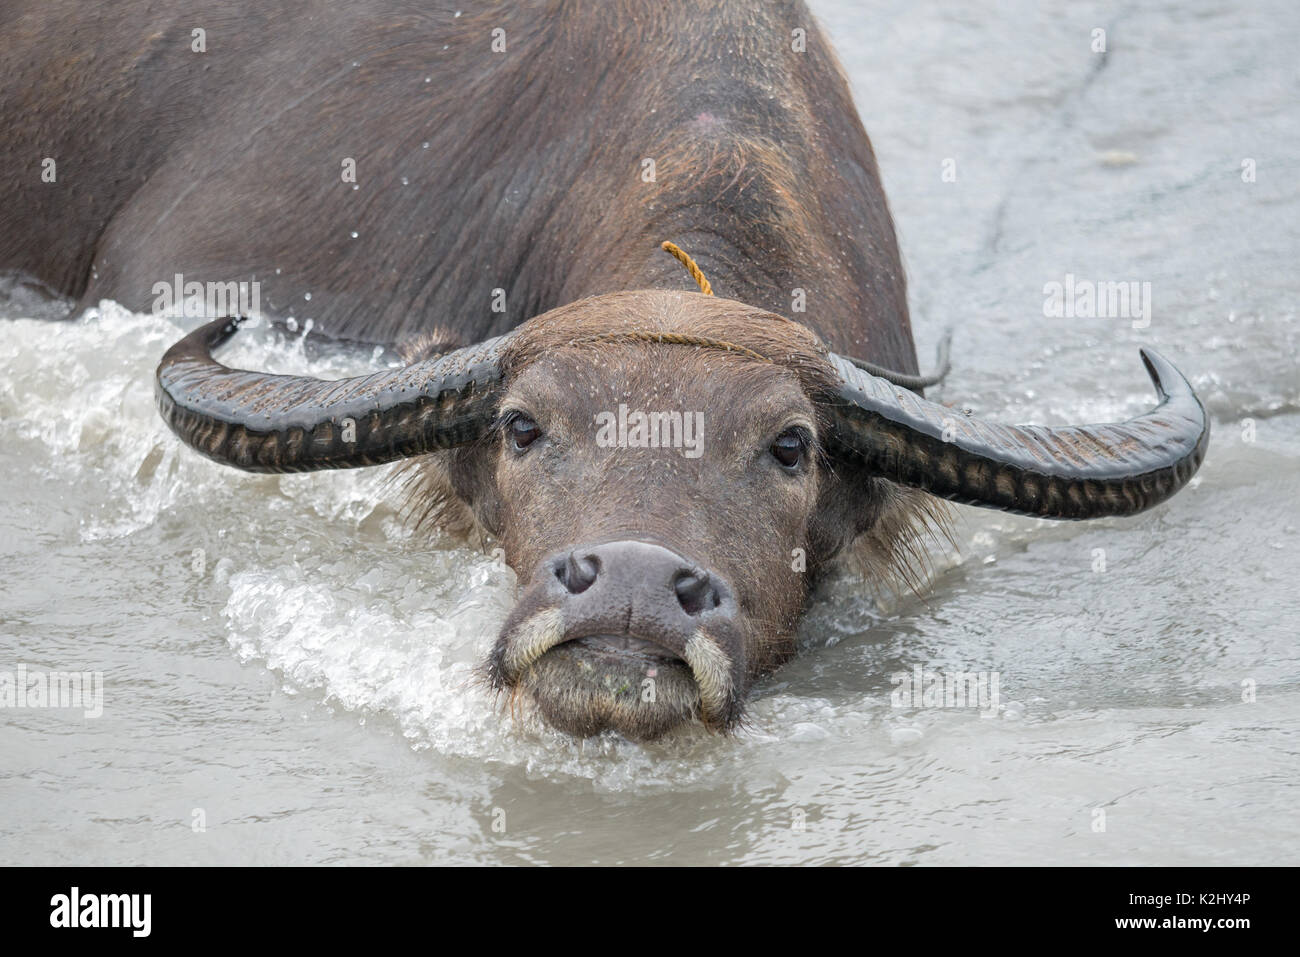 Philippines water buffalo(Carabao) in the river Stock Photo